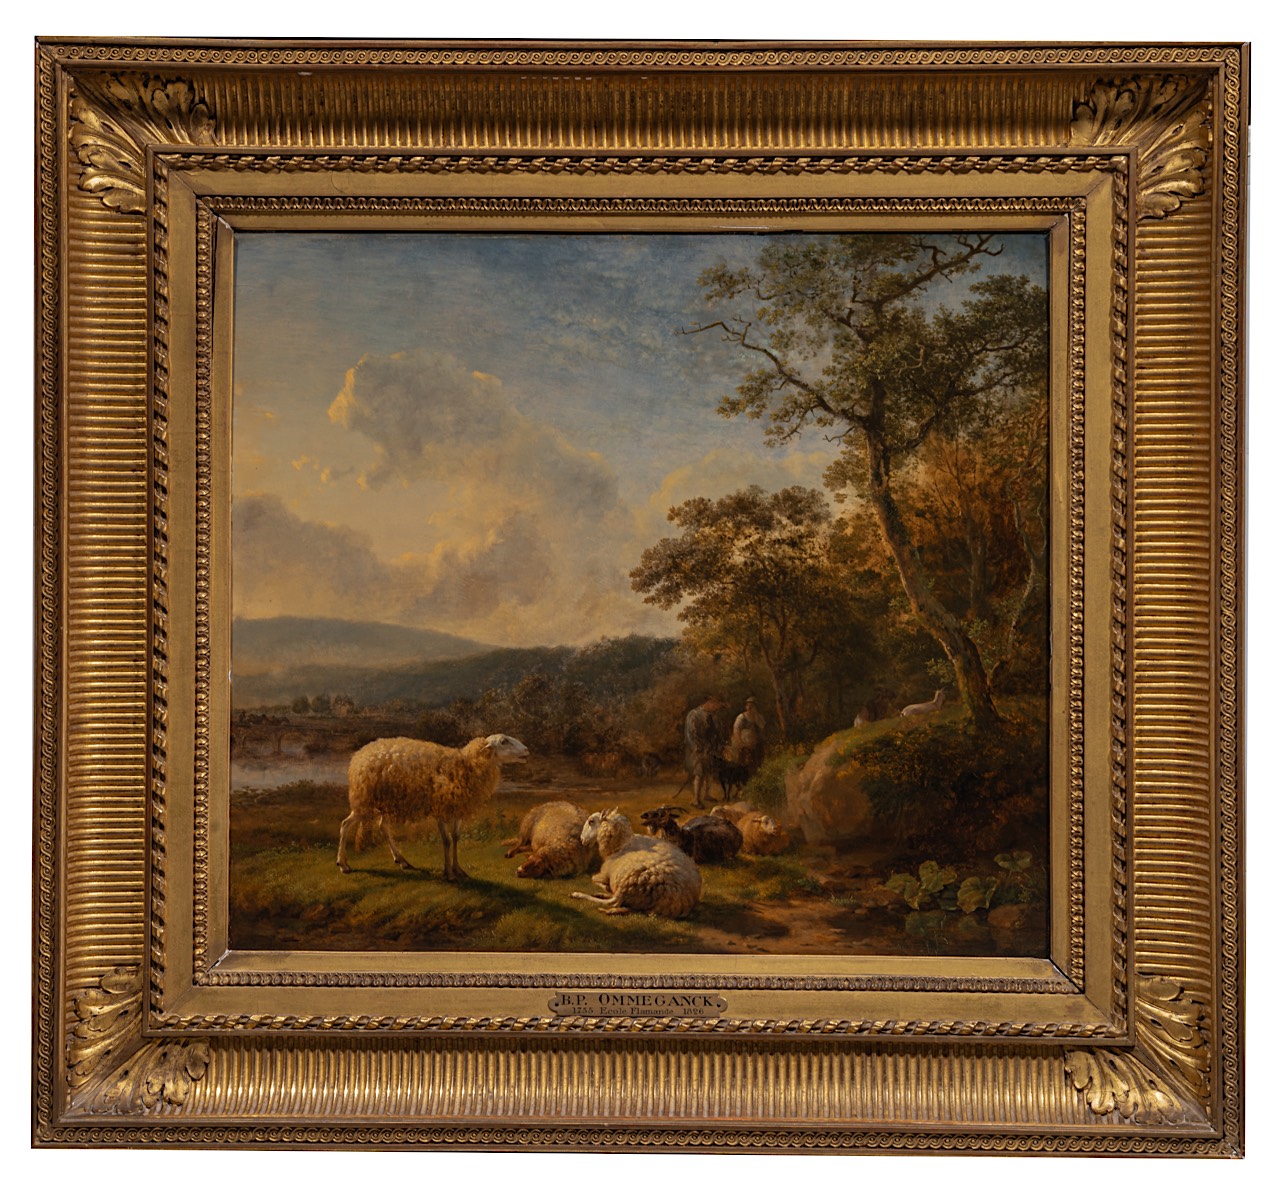 Balthazar Paul Ommeganck (1755-1826), shepherds with resting flock of sheep, oil on panel 50 x 60 cm - Image 2 of 7